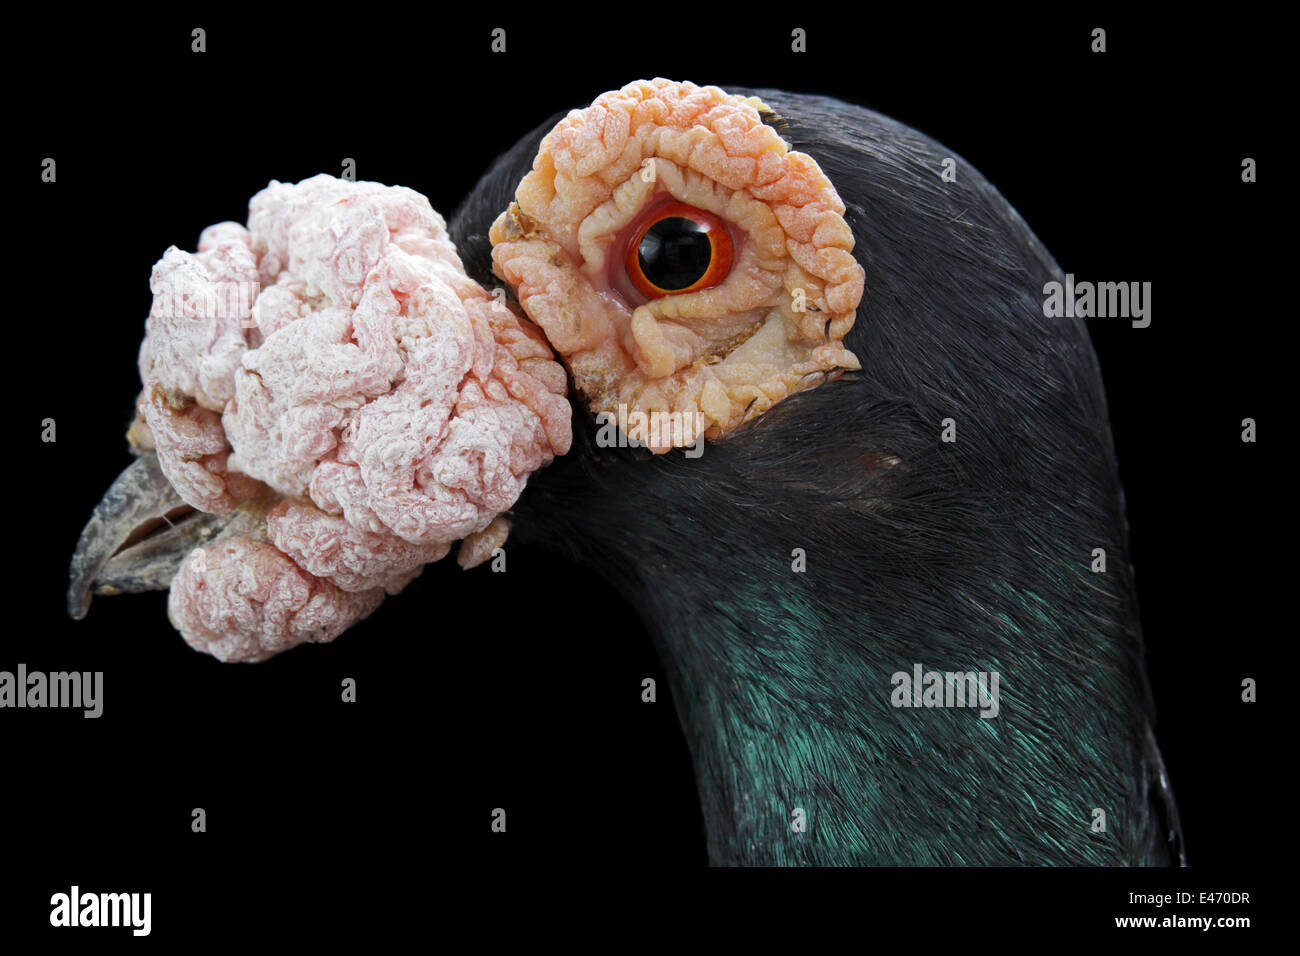 Close-up of the head of an English carrier, a breed of fancy pigeon, at the Faircount Pigeon Show, Ansonia, Connecticut, U.S.A. Stock Photo